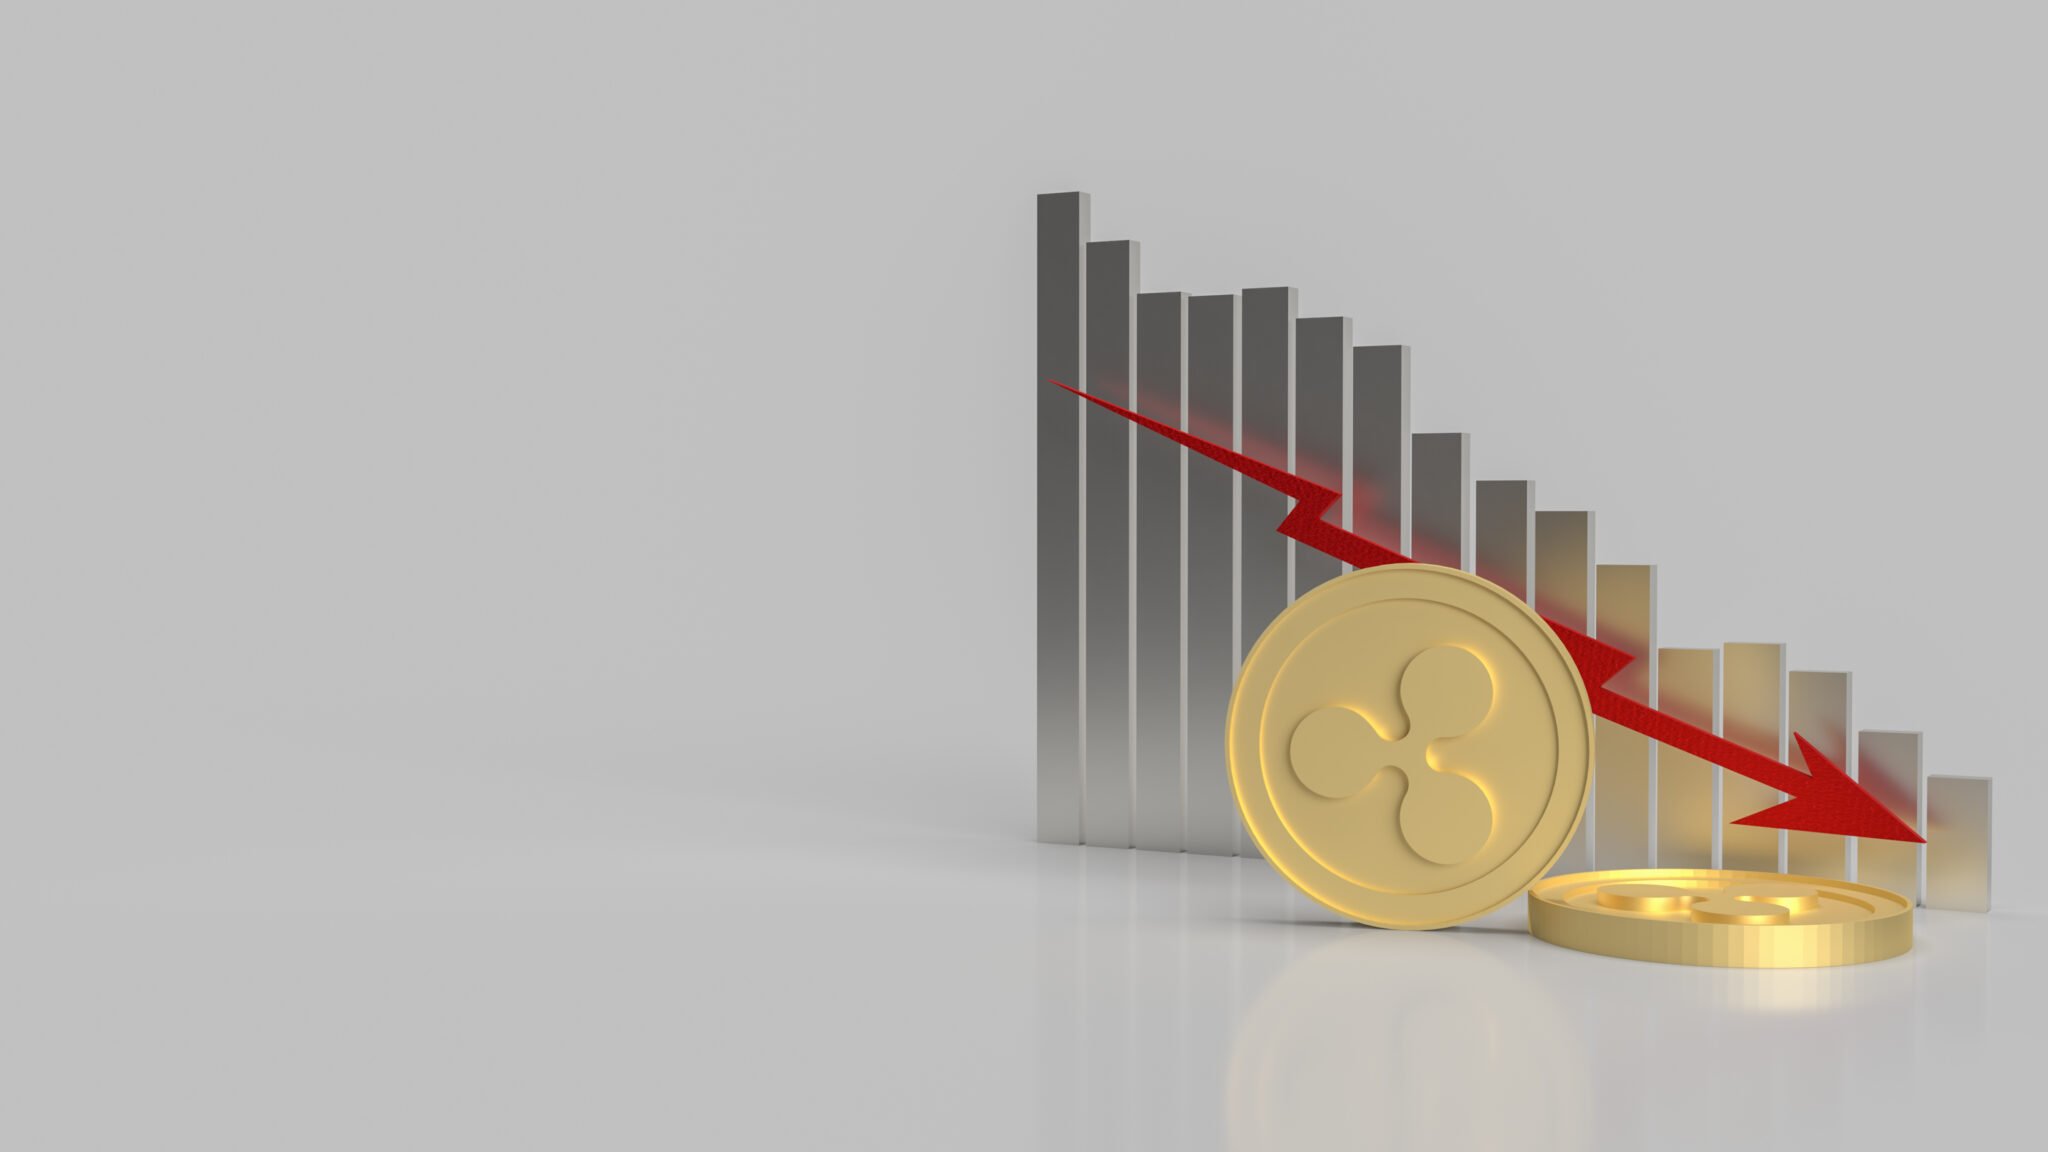 ripple coins and chart down for business content 3d rendering